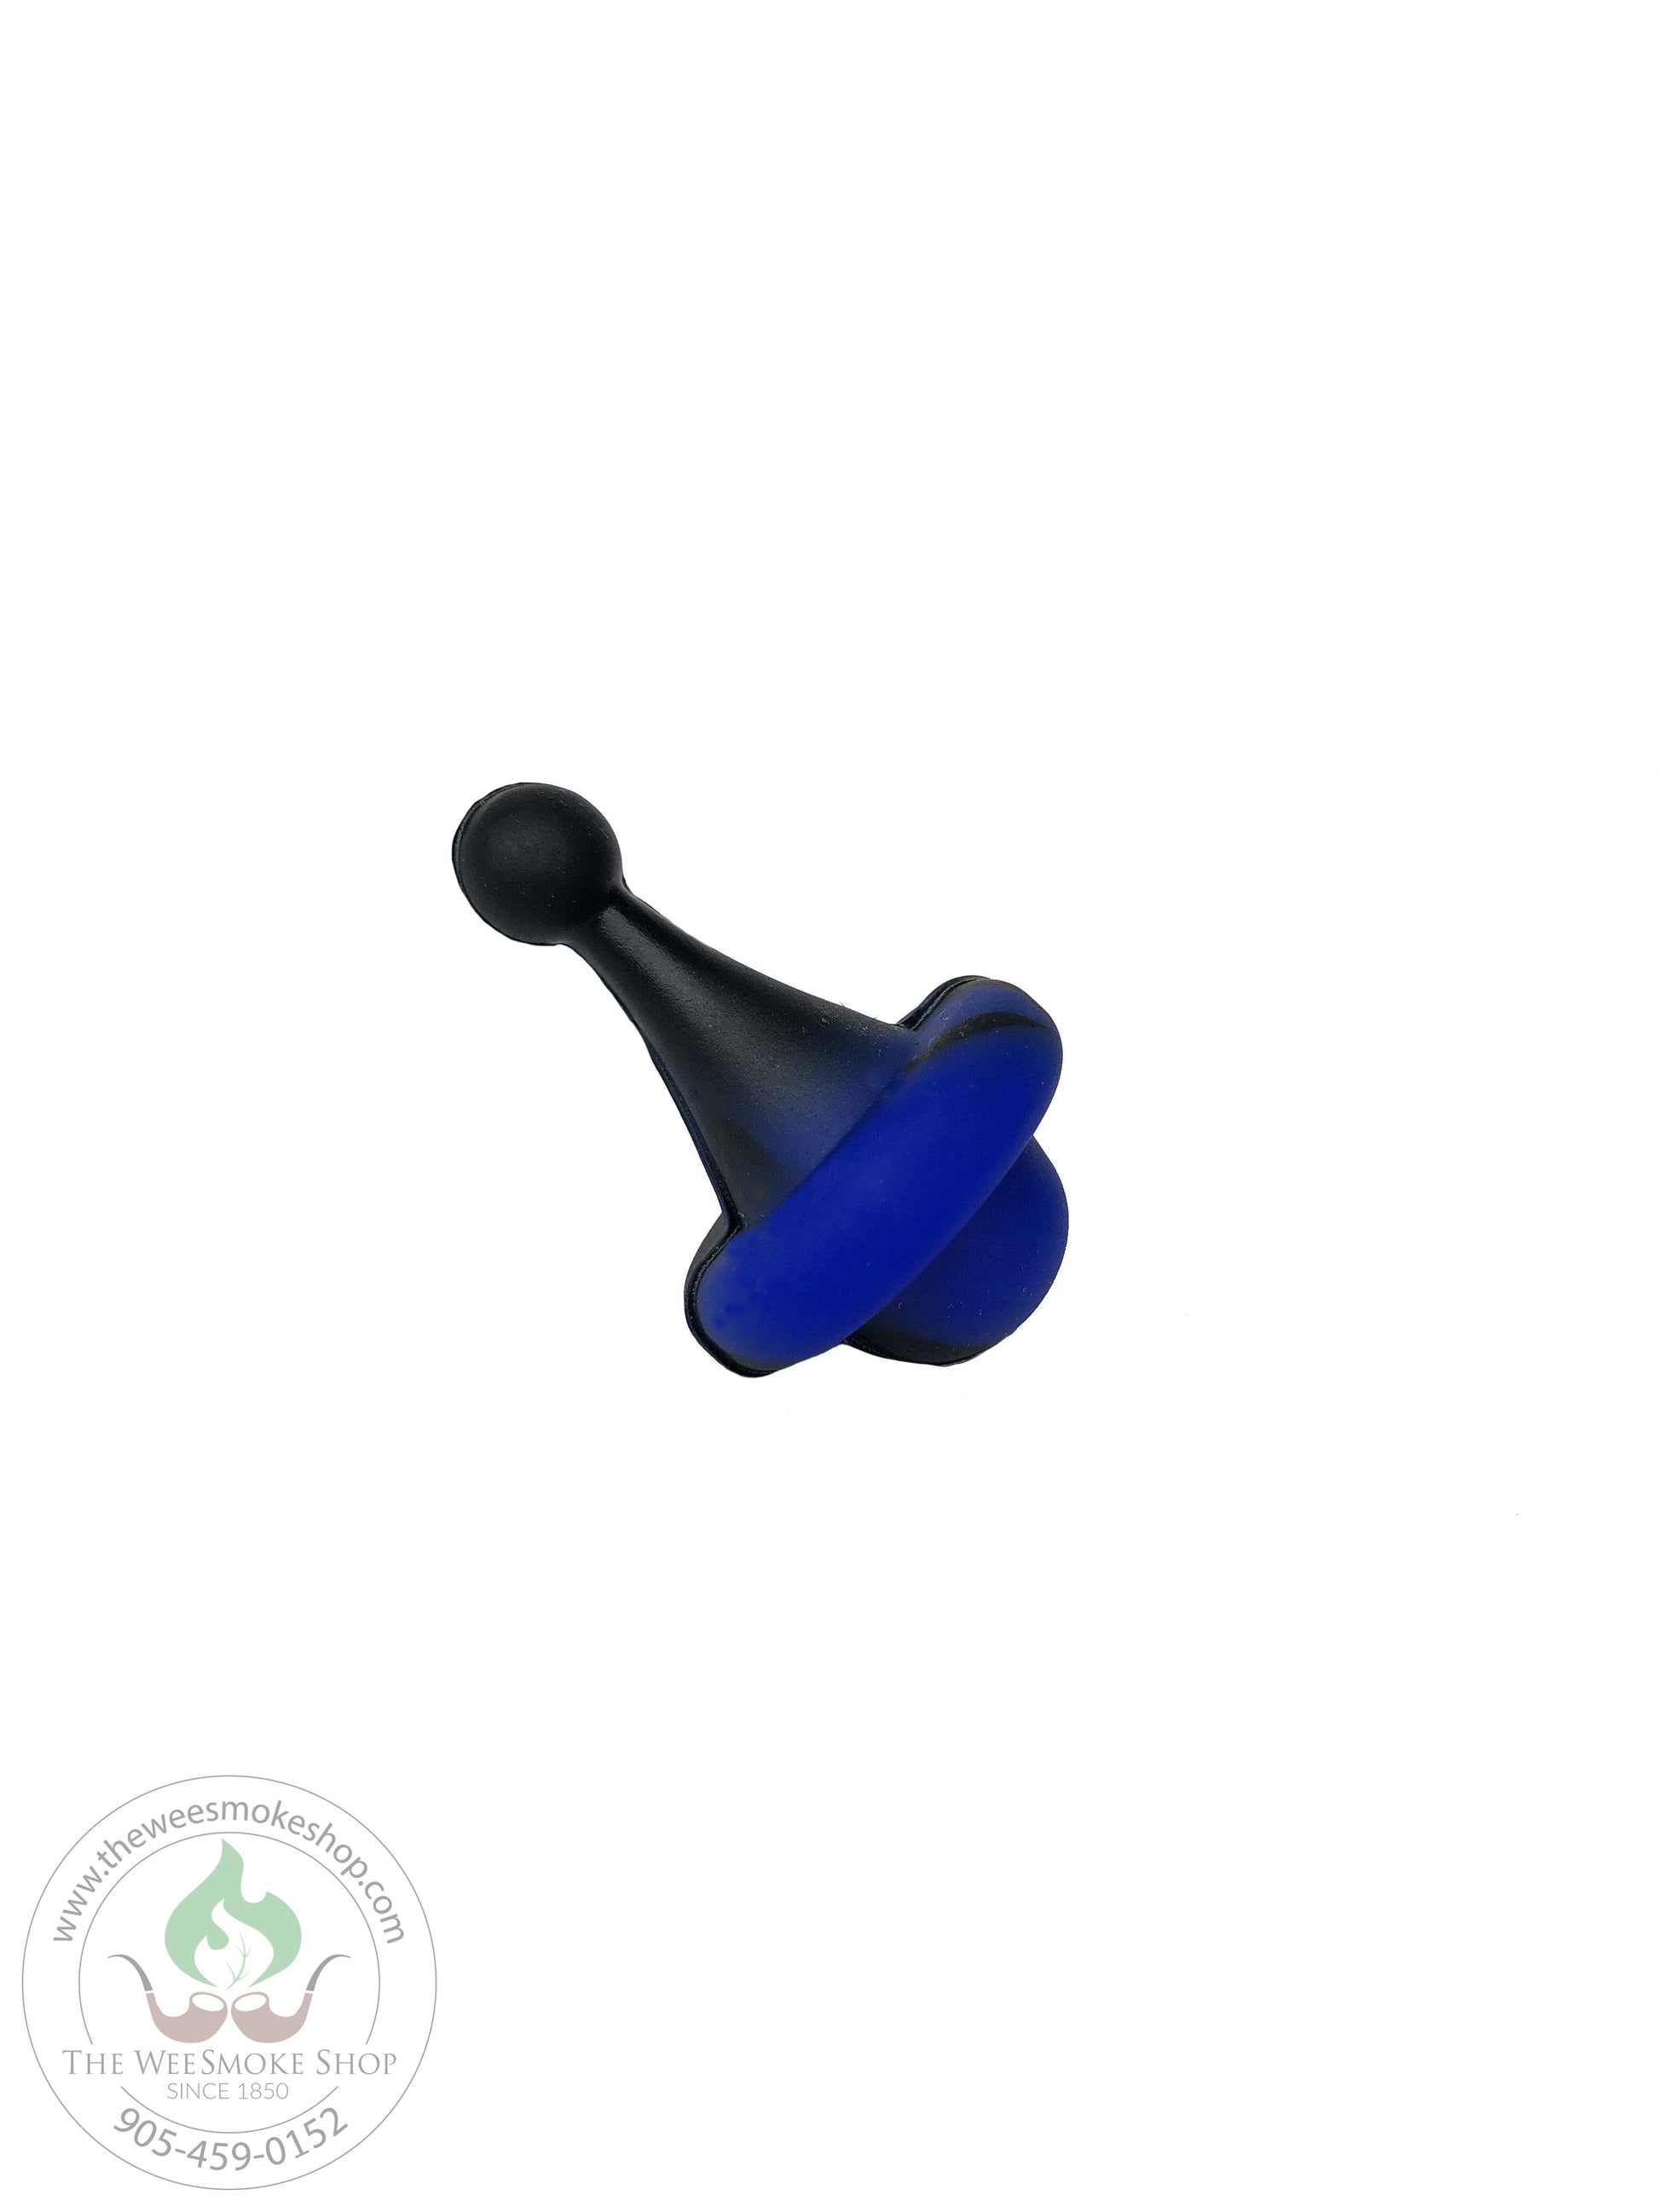 UFO Black and Blue Silicone Carb Cap - Wee Smoke Shop